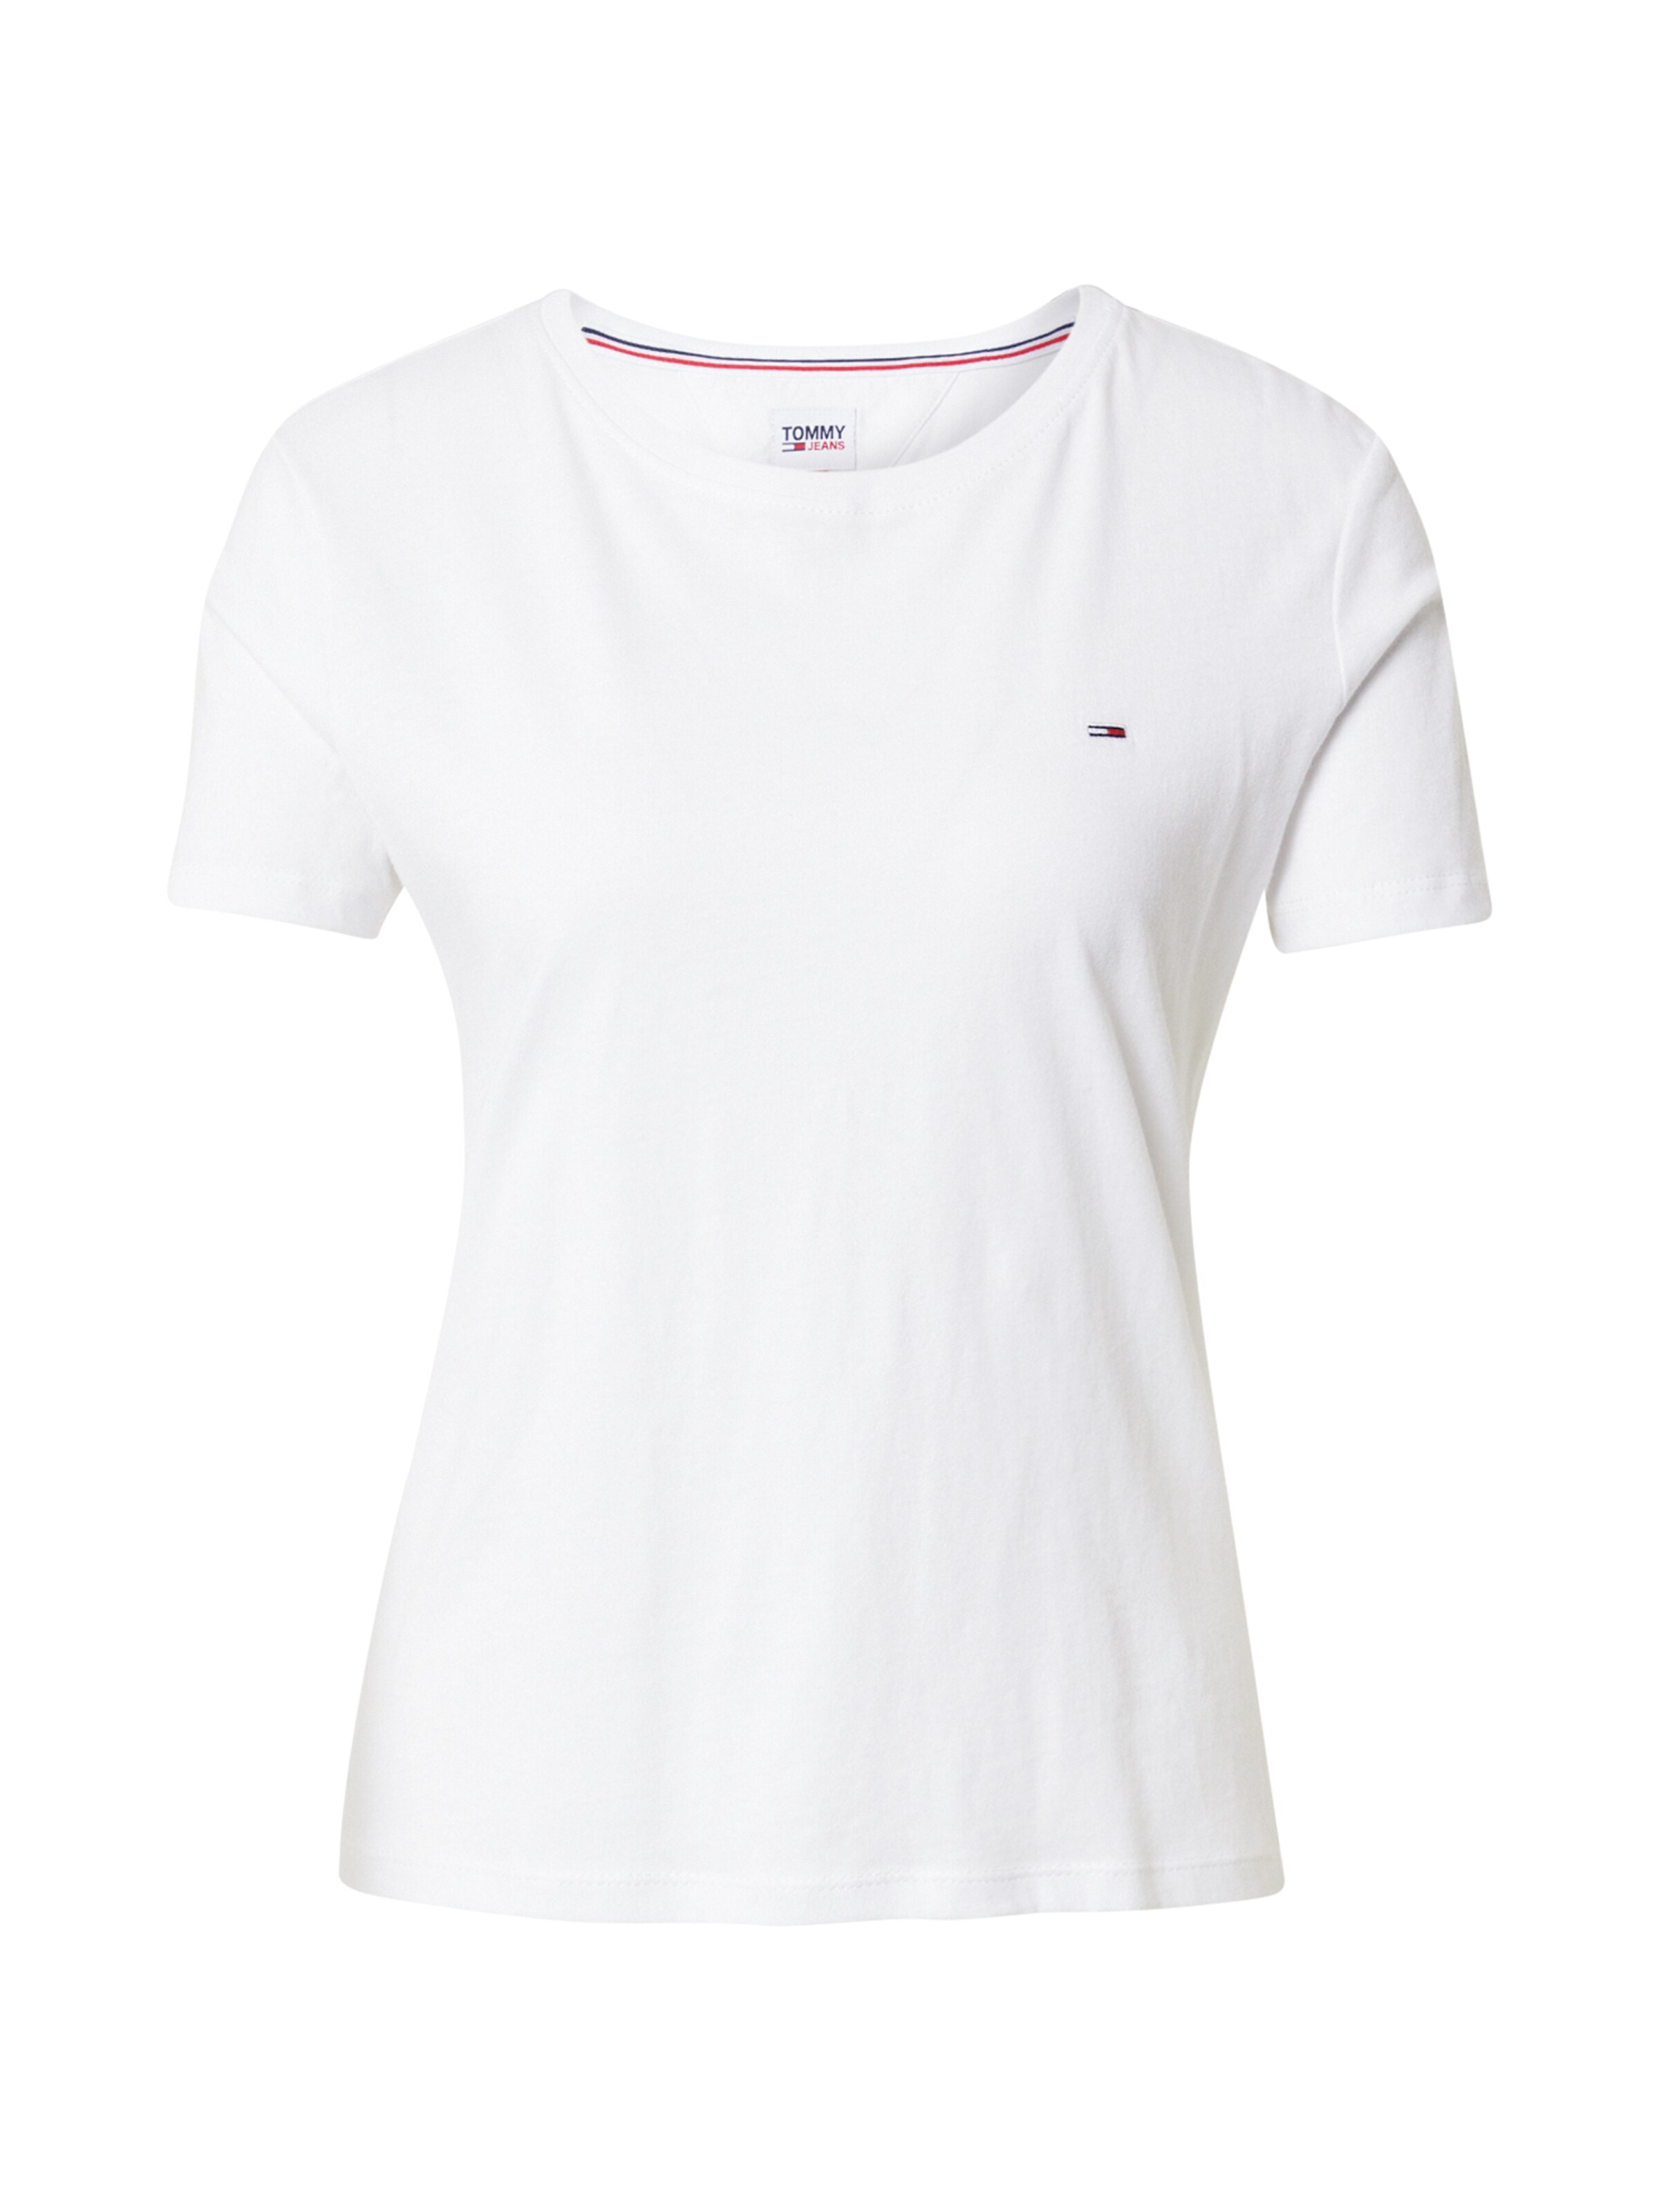 Frauen Shirts & Tops Tommy Jeans T-Shirt in Weiß - LB43083